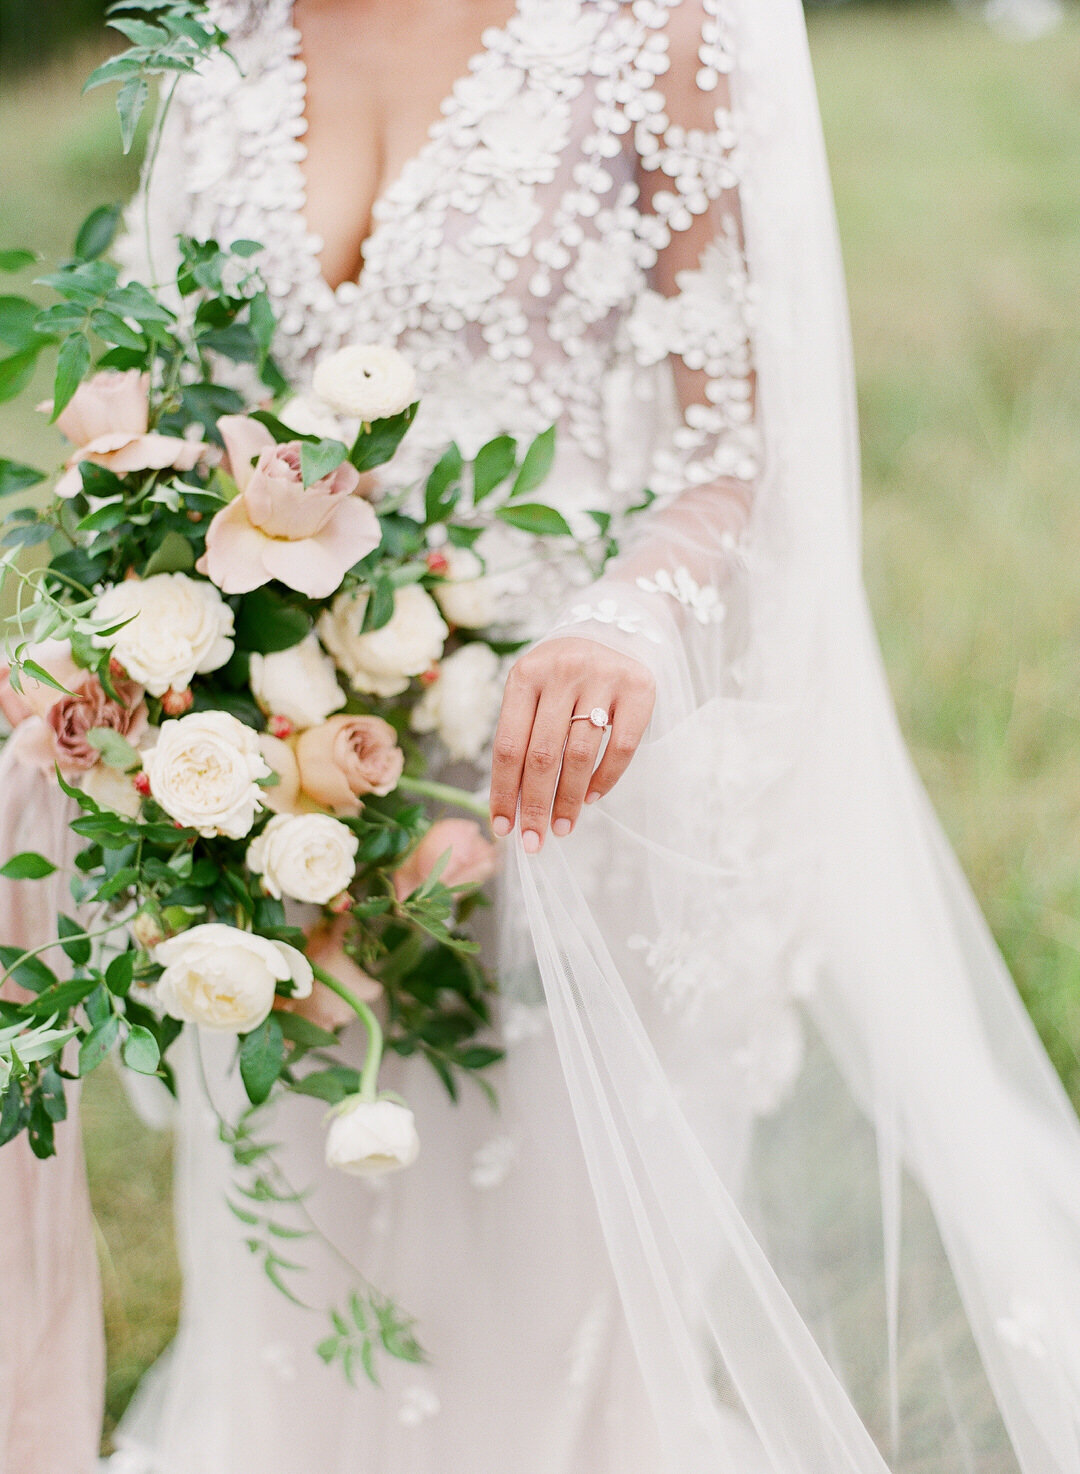 Bride holding bouquet and veil